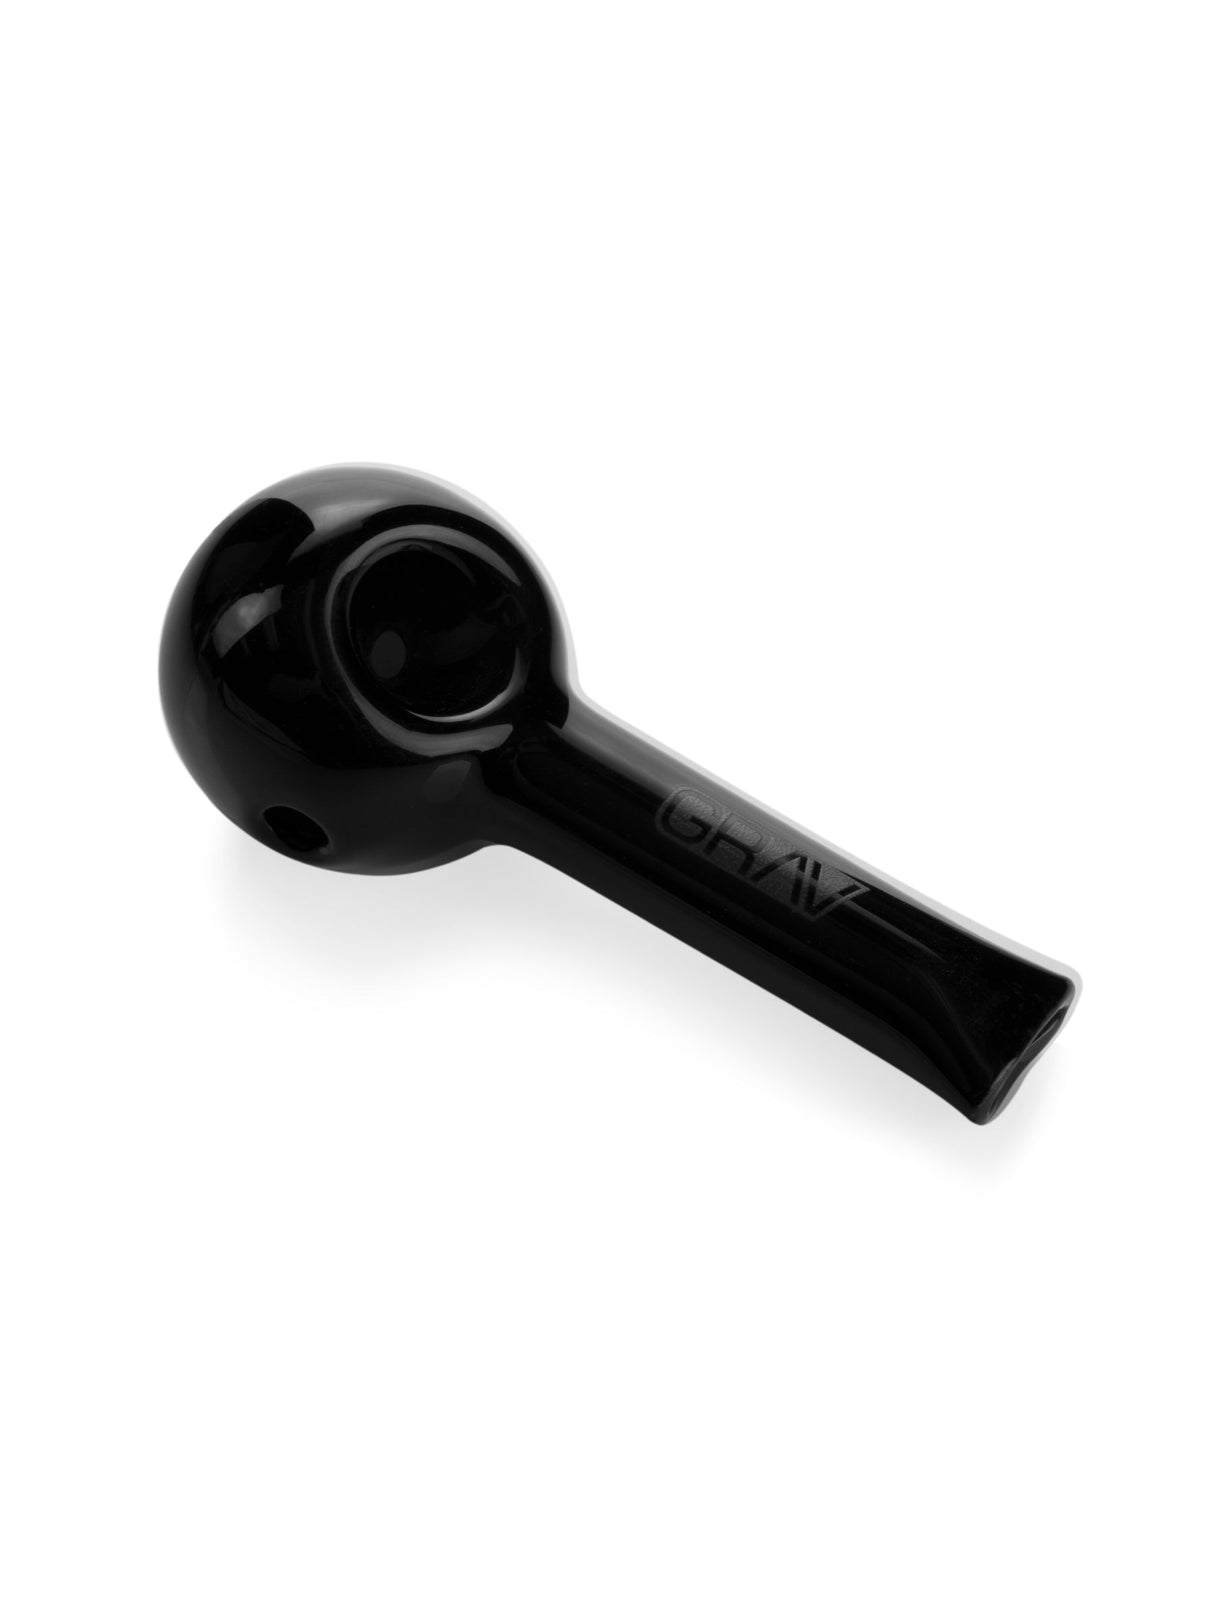 GRAV Pinch Spoon Hand Pipe in Black, Compact Borosilicate Glass, 3.25" Length, Top View